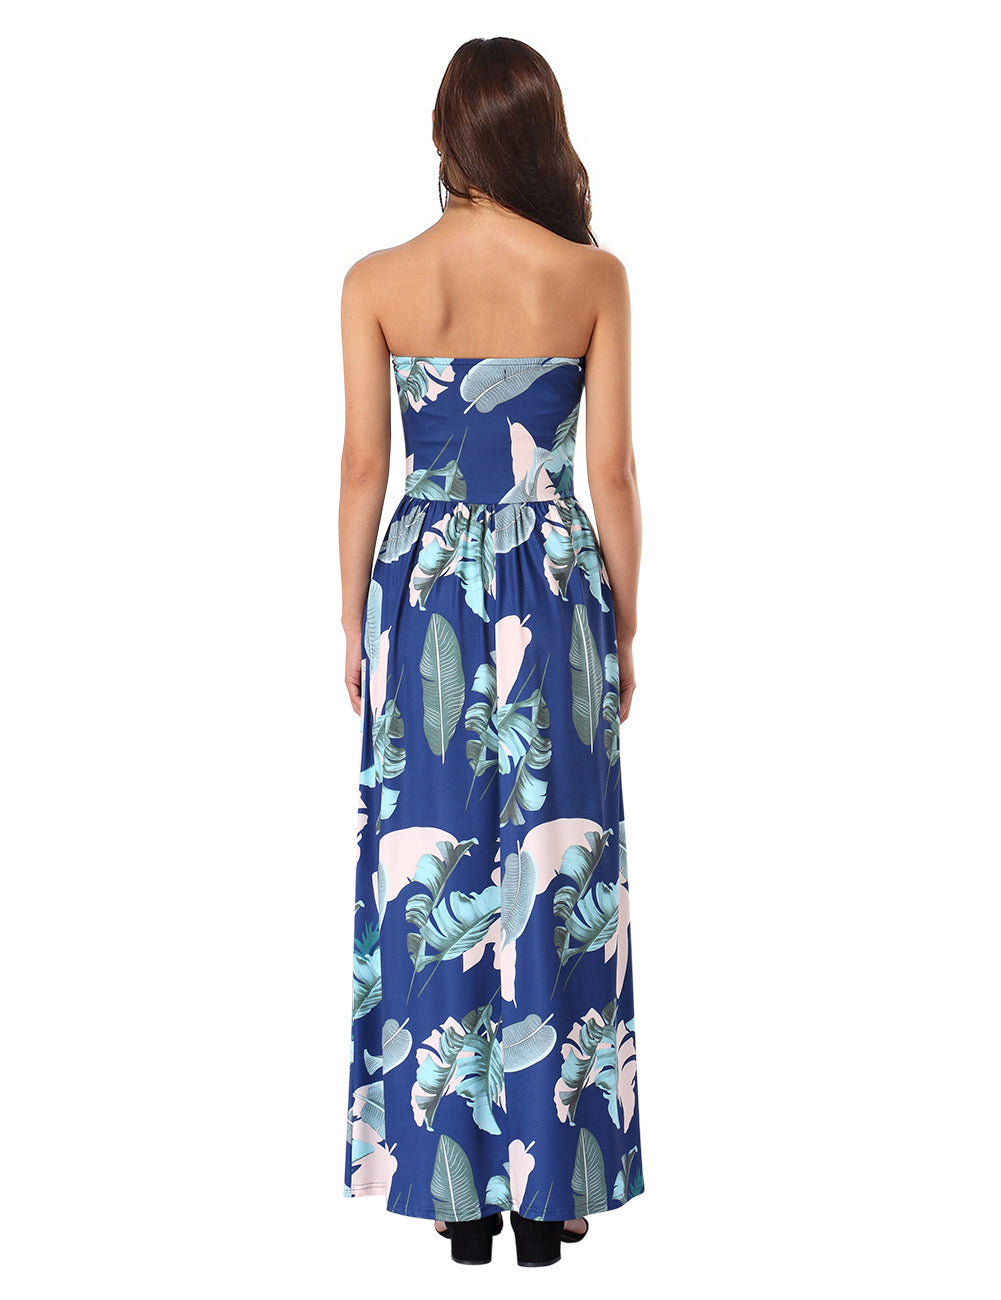 YESFASHION Women's Strapless Graceful Floral Party Maxi Long Dress Navy Blue